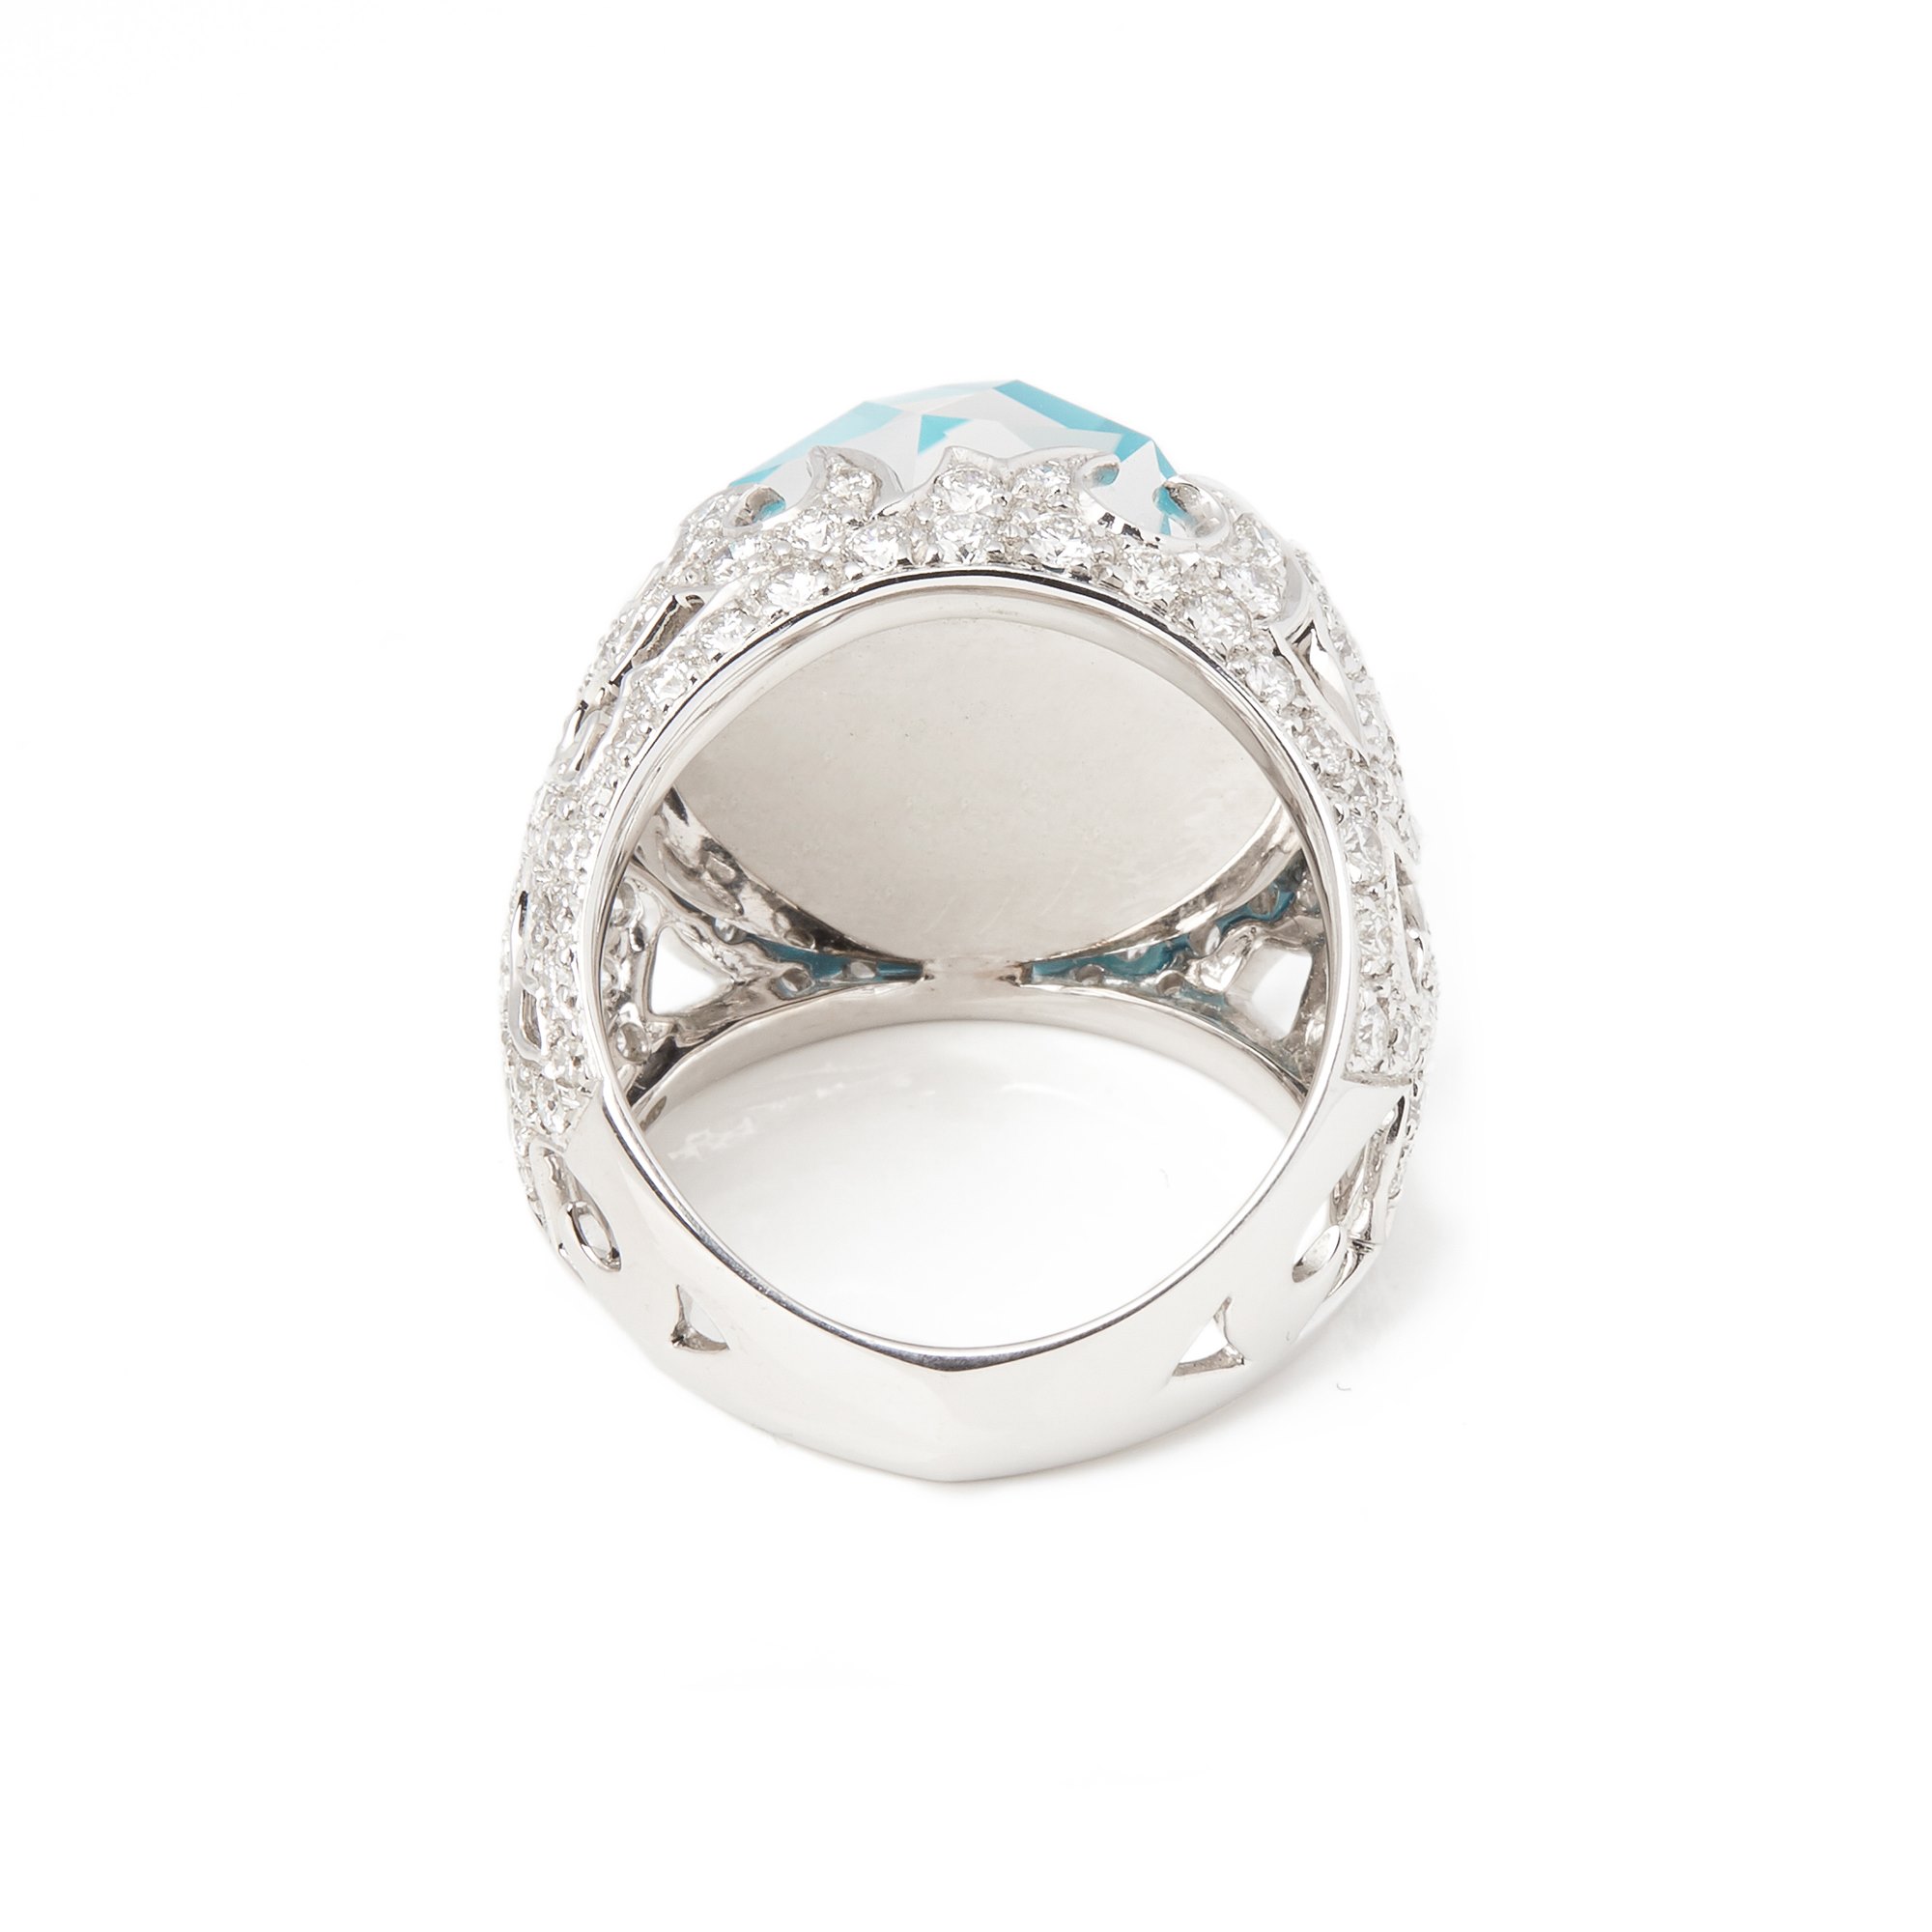 Stephen Webster 18ct White Gold Borneo Lipstick Crystal Haze and Diamond Ring